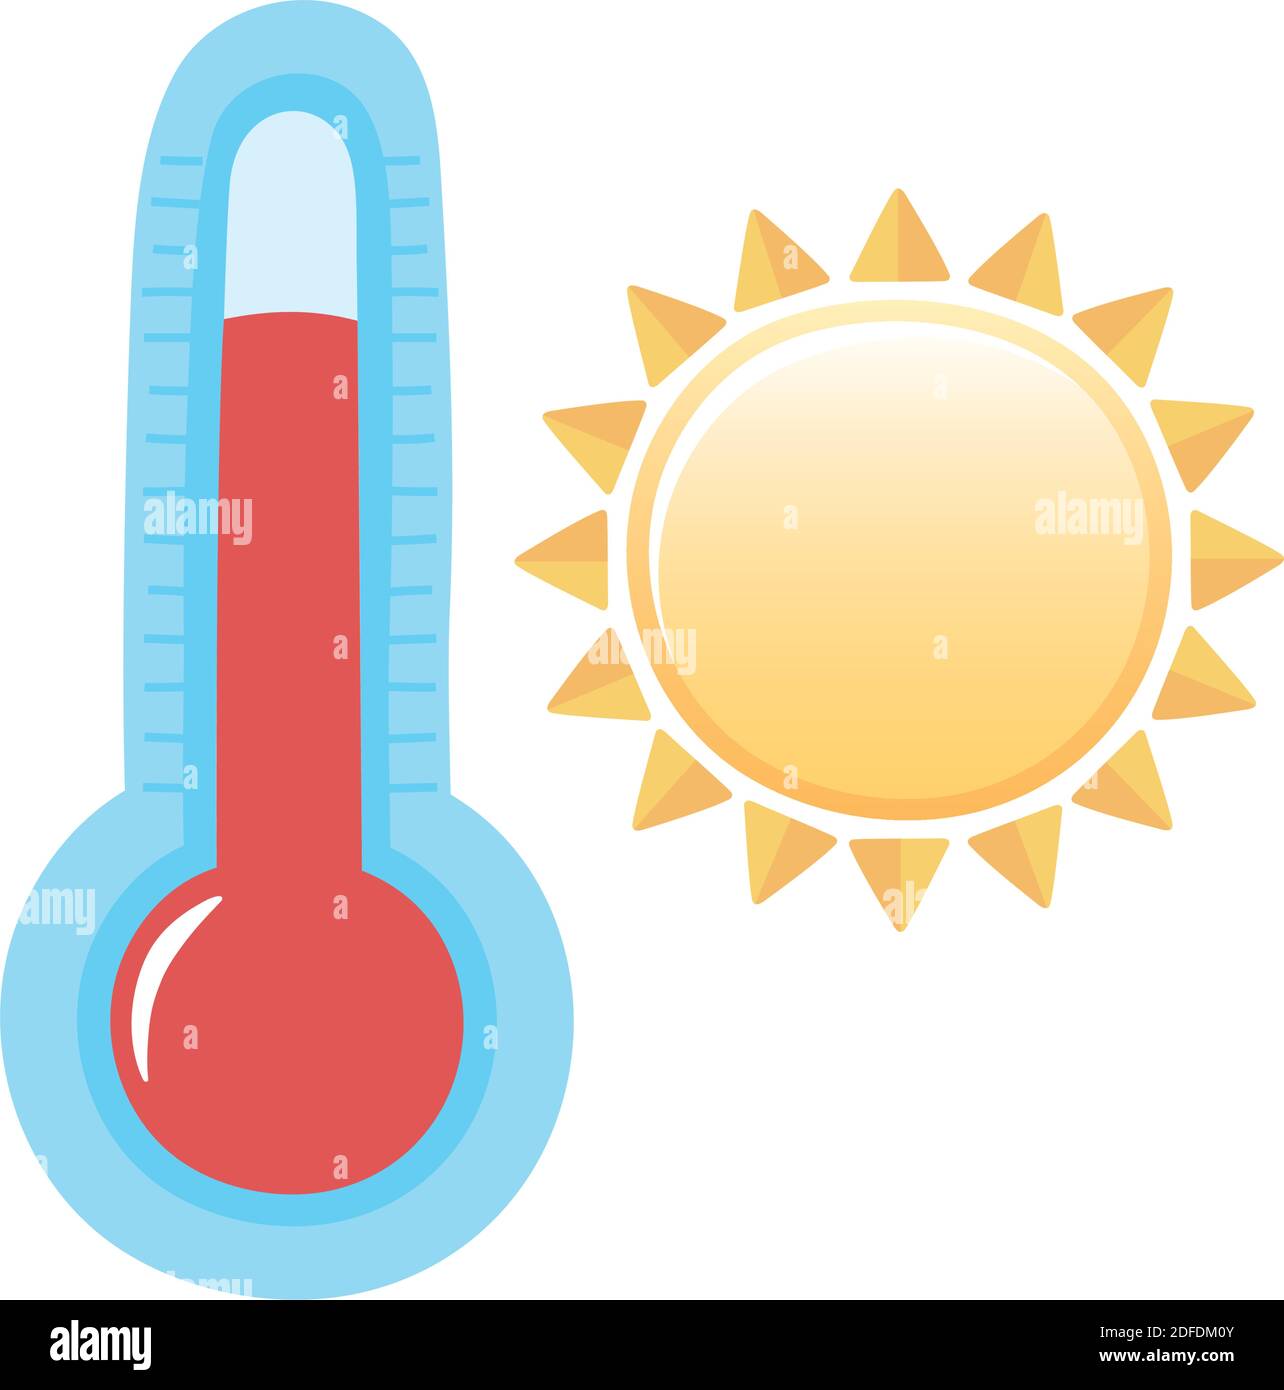 https://c8.alamy.com/comp/2DFDM0Y/weather-summer-sun-hot-temperature-icon-isolated-image-vector-illustration-2DFDM0Y.jpg